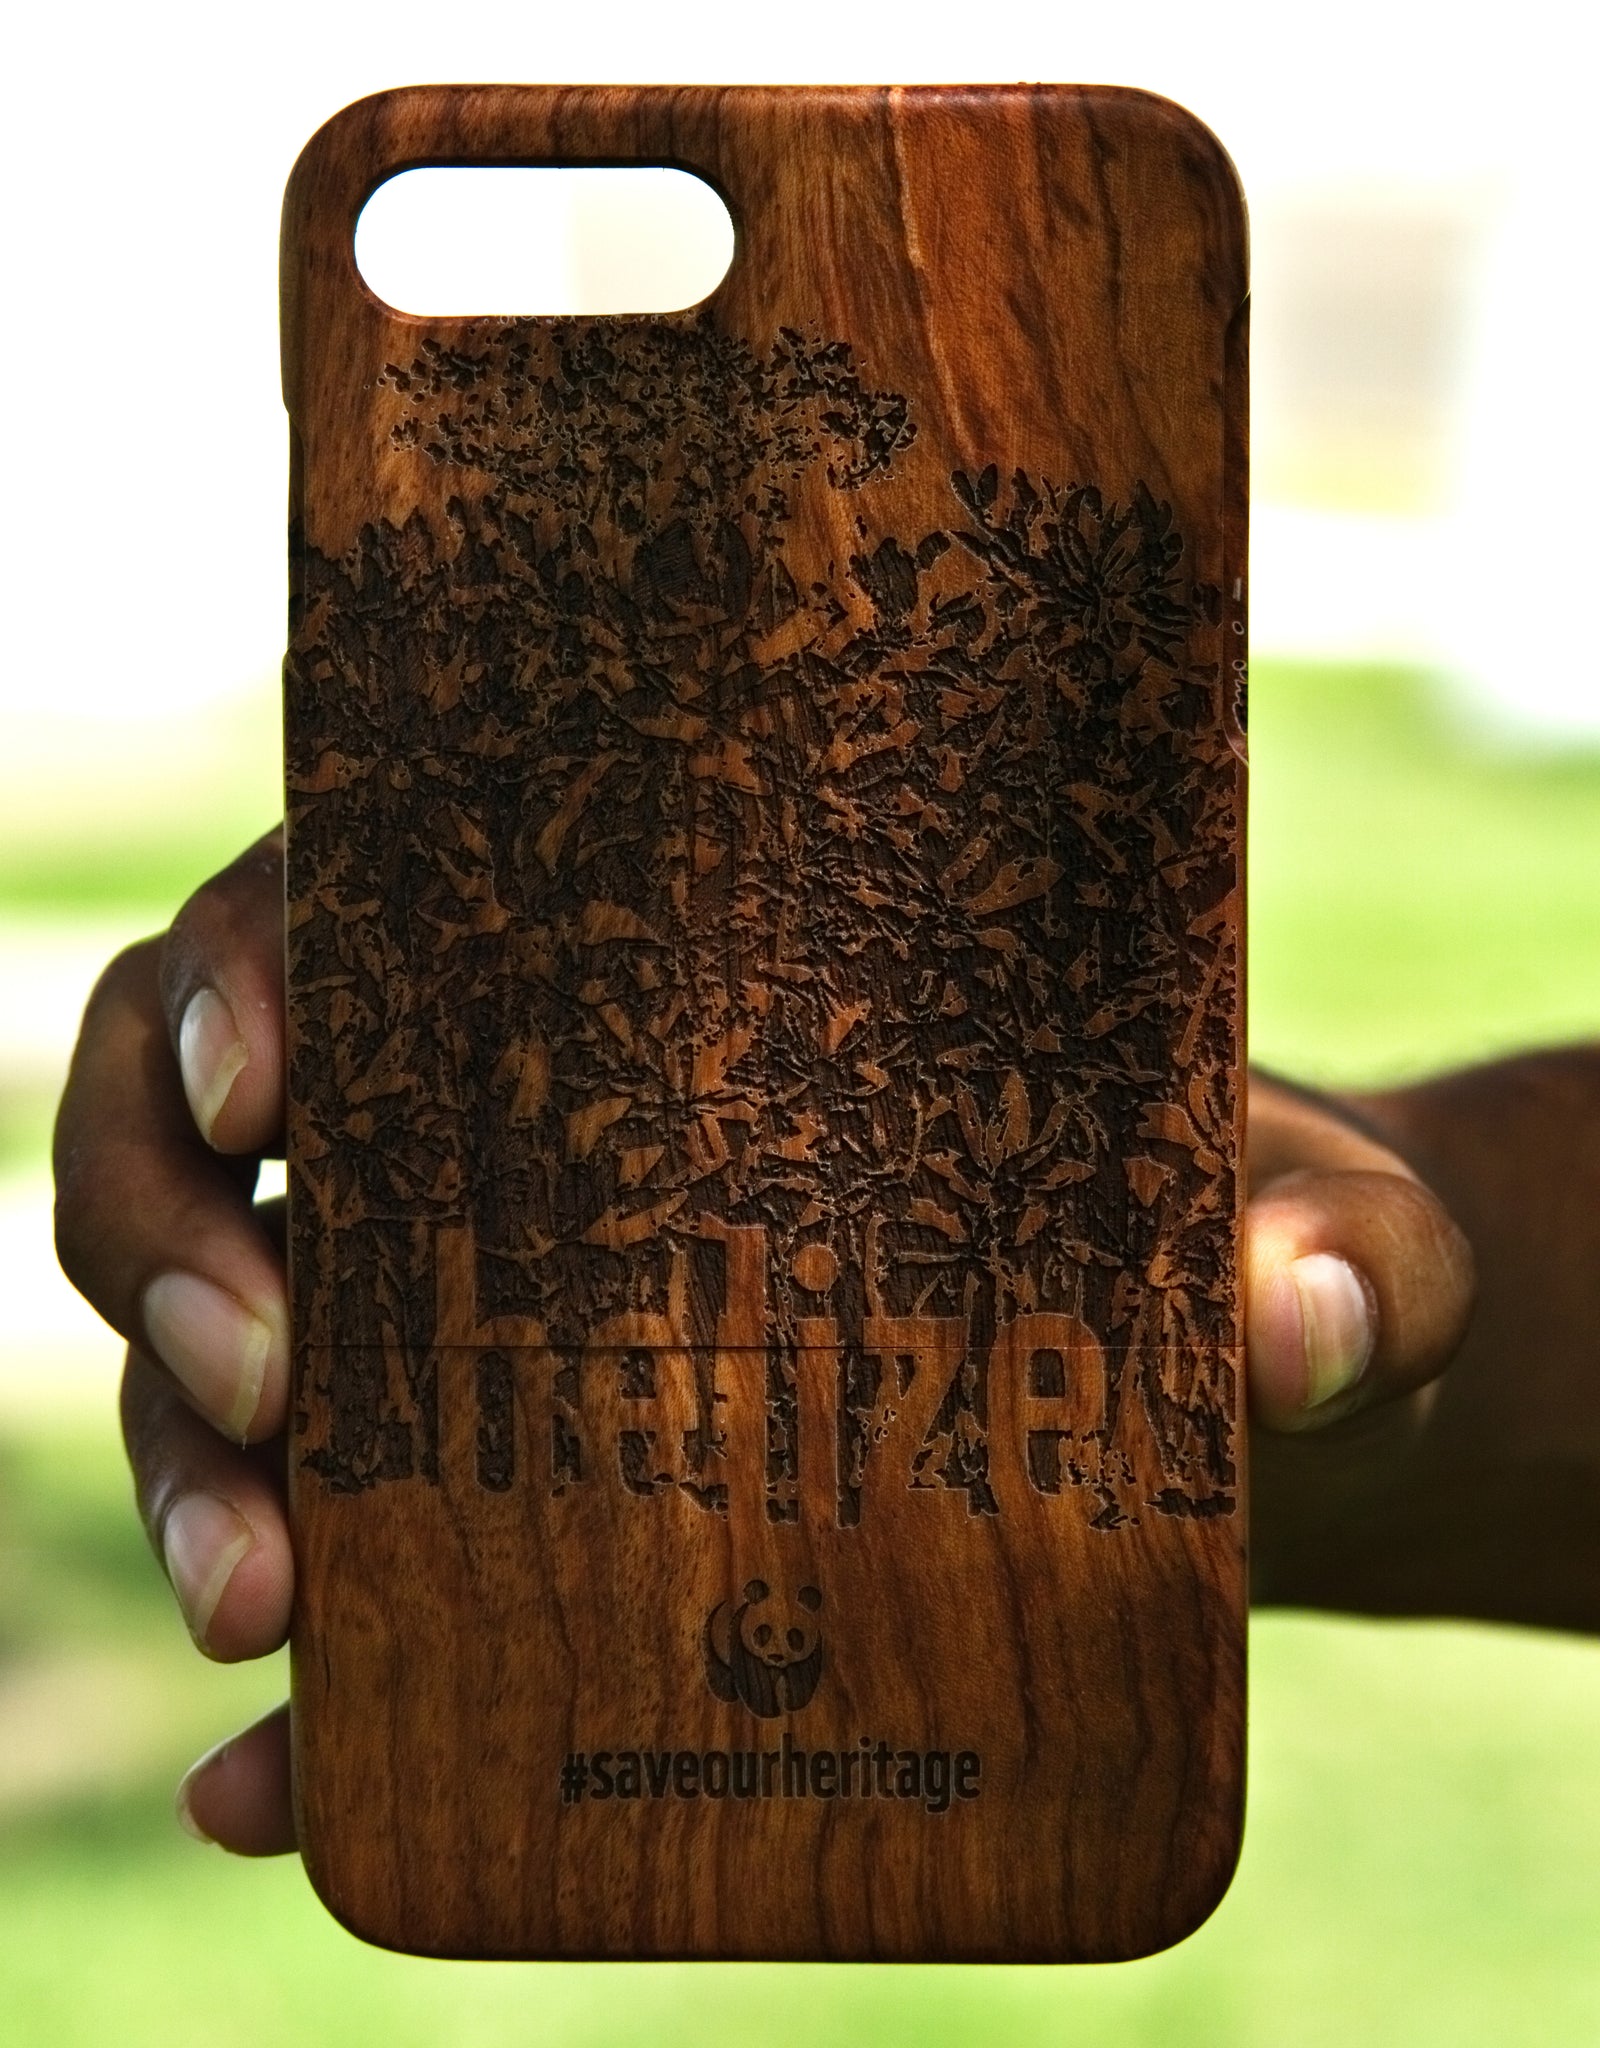 IPhone 7+/8+ (WWF Belize Saving our Shared Heritage design)